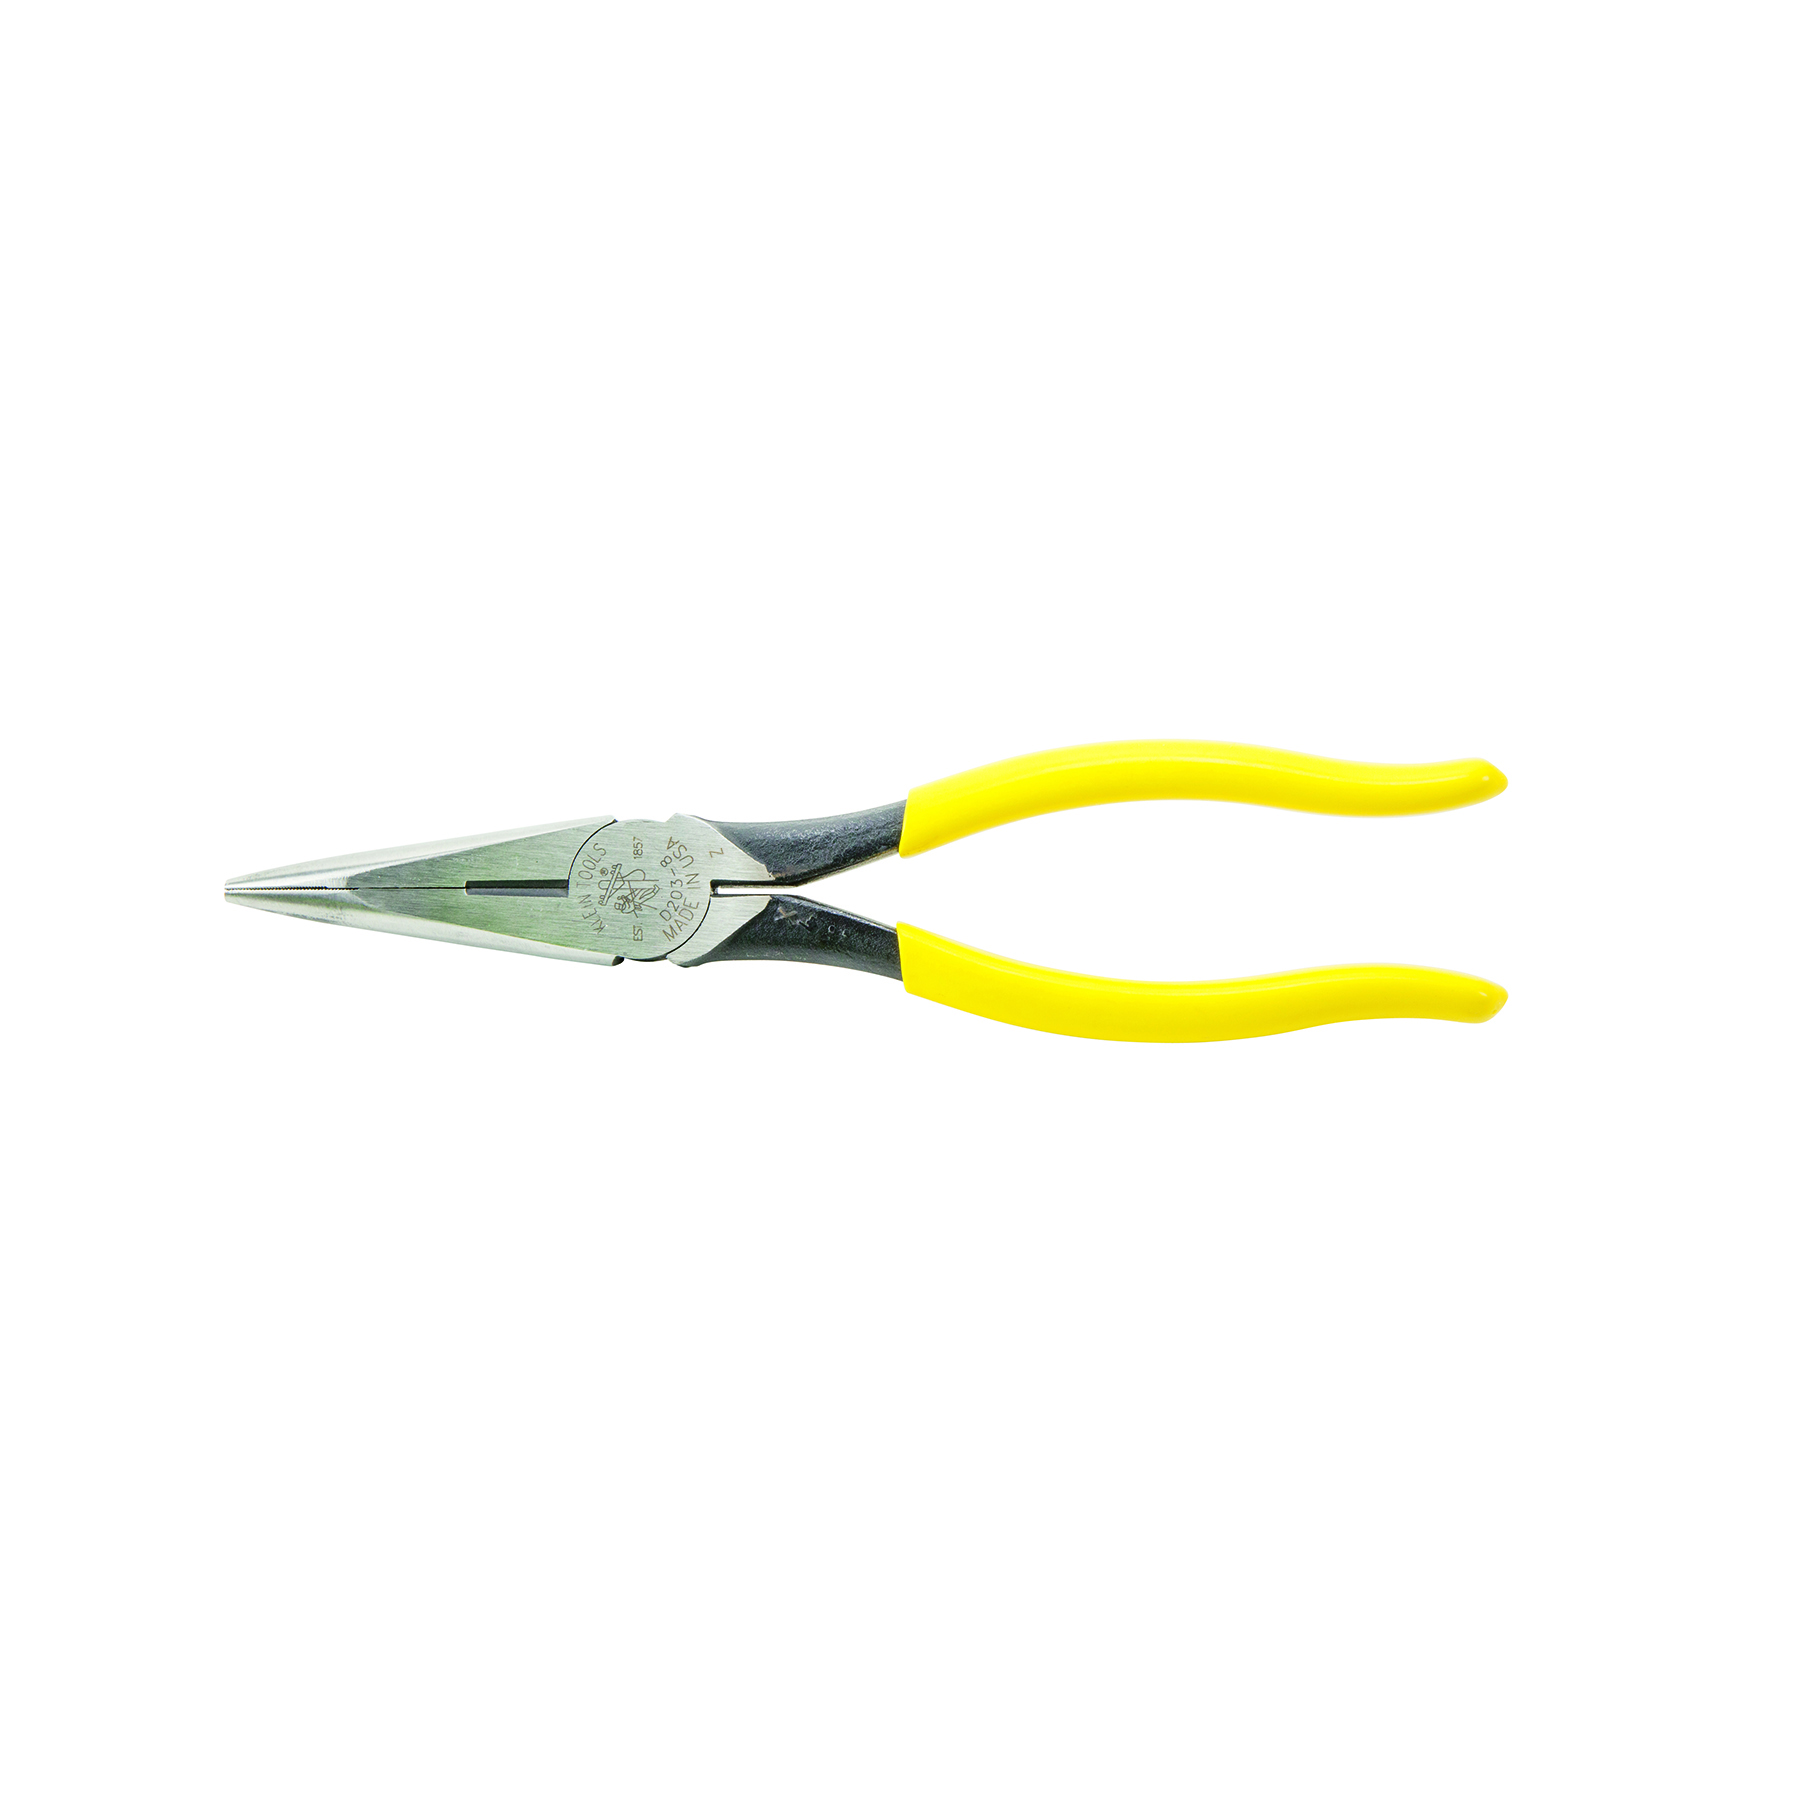 8' HD LONG-NOSE PLIERS - SIDE-CUTTING